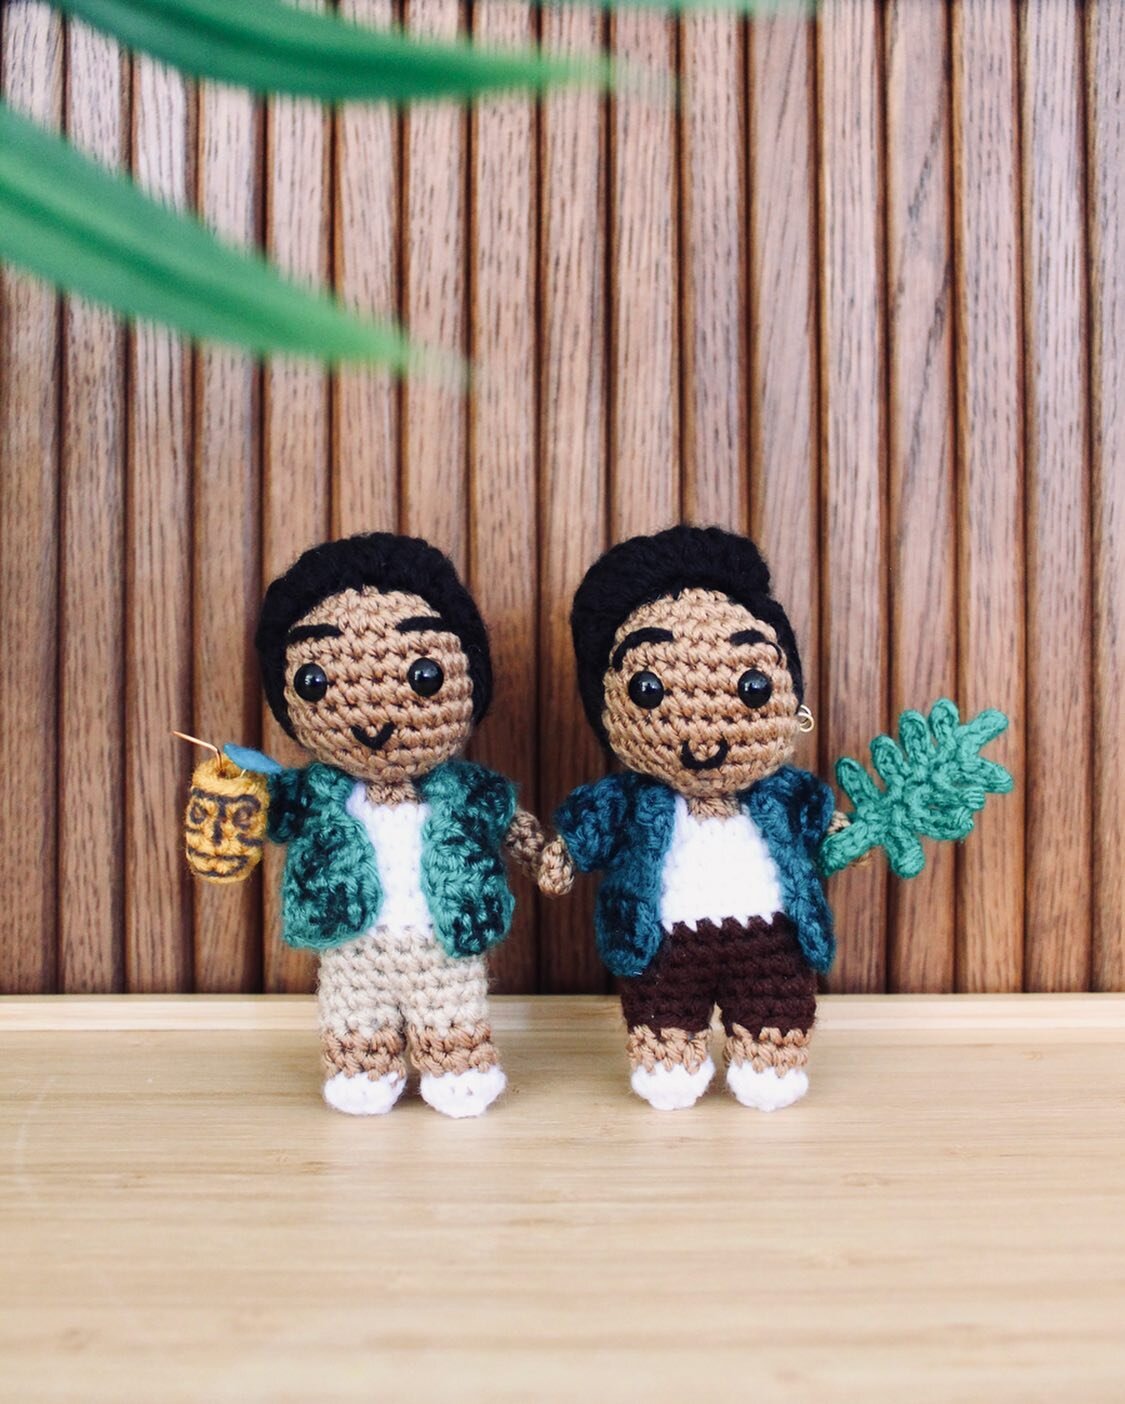 #AlohaFriday from our mini-me&rsquo;s, custom crocheted by @greenhookstudio! They turned out so cute! We&rsquo;ll be bringing them around on our tiki outings! 🌿🌿🌿
Can you tell who&rsquo;s who? 🤙🏽